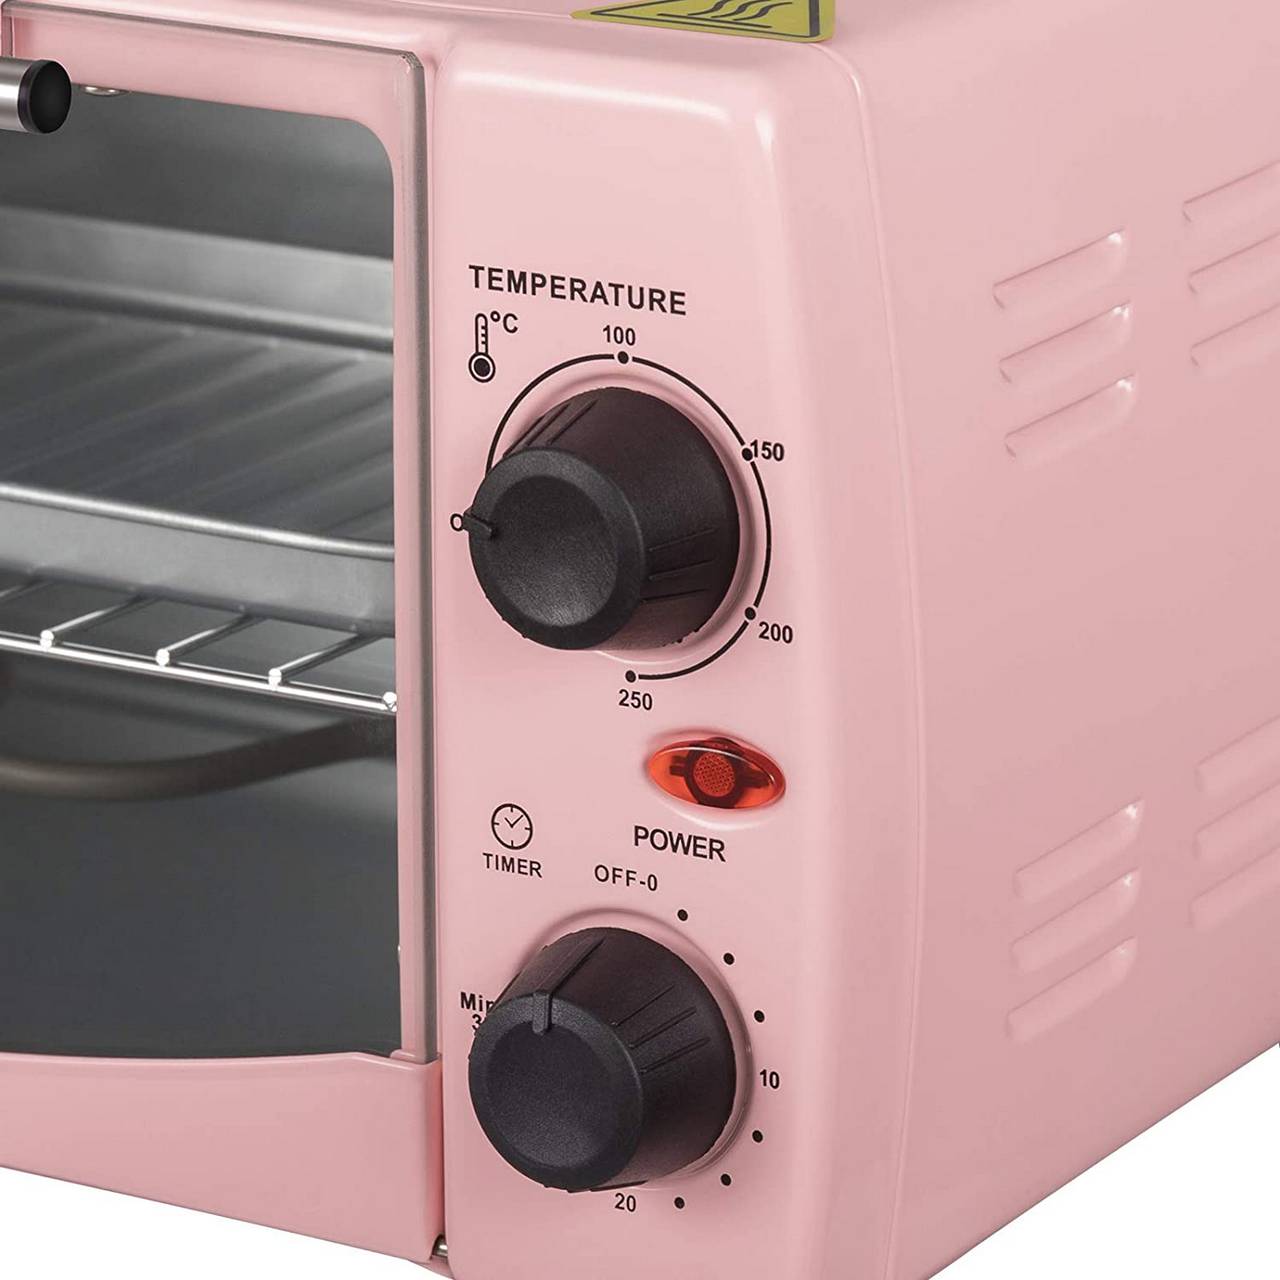 1050W Double Glazed Door Toaster Oven Red Roscloud@ Mini 12L Oven with Temperature Setting 0-230℃ and 0-60 Mins Timer 